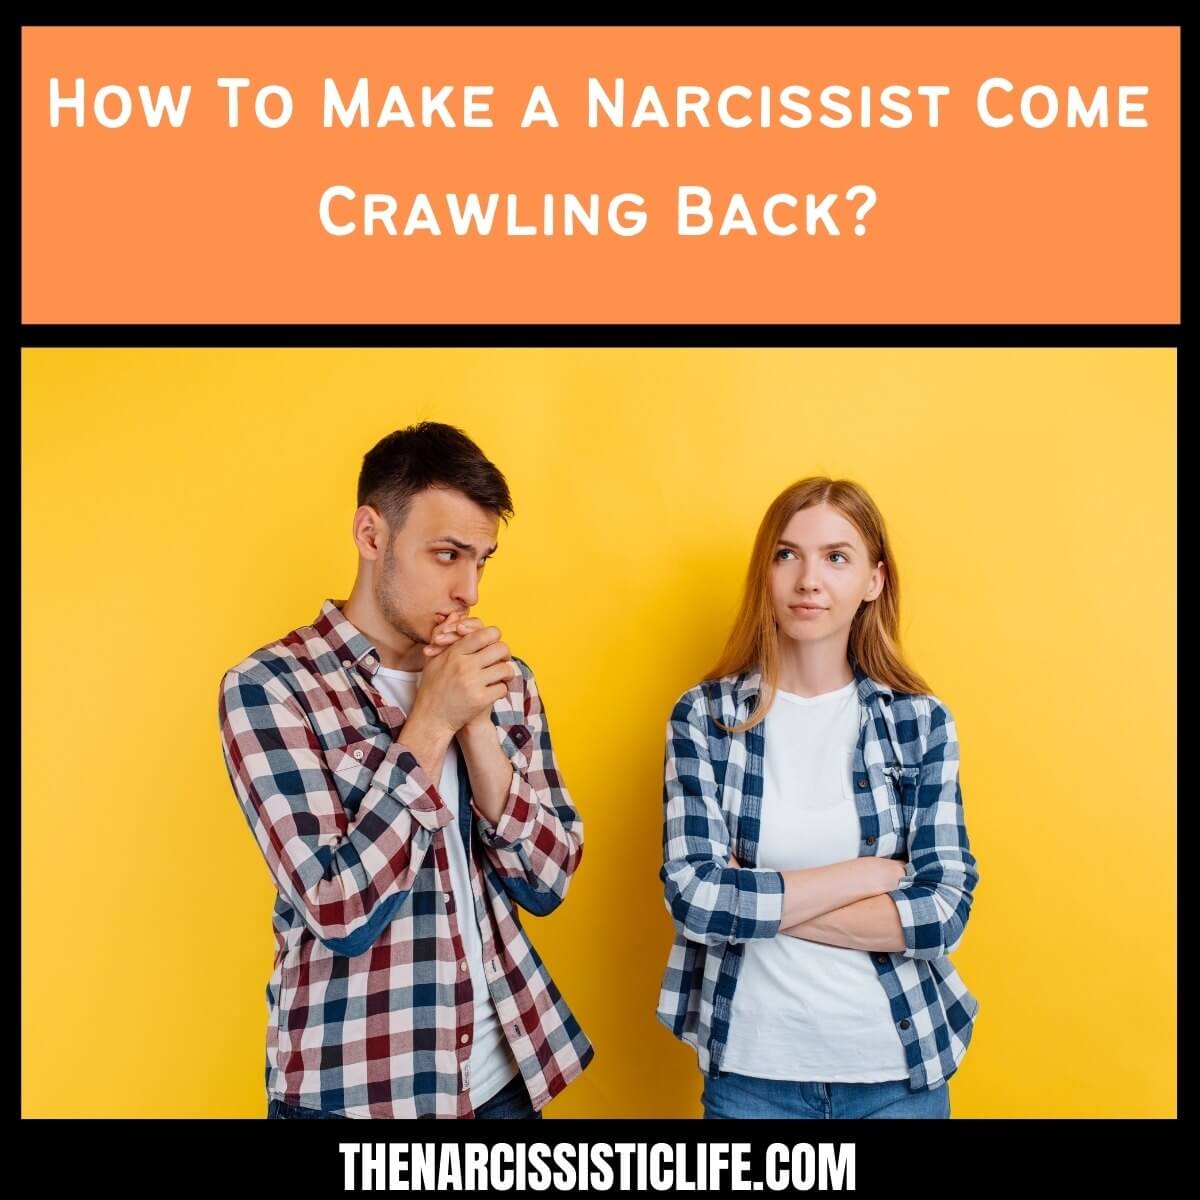 How To Make a Narcissist Come Crawling Back?